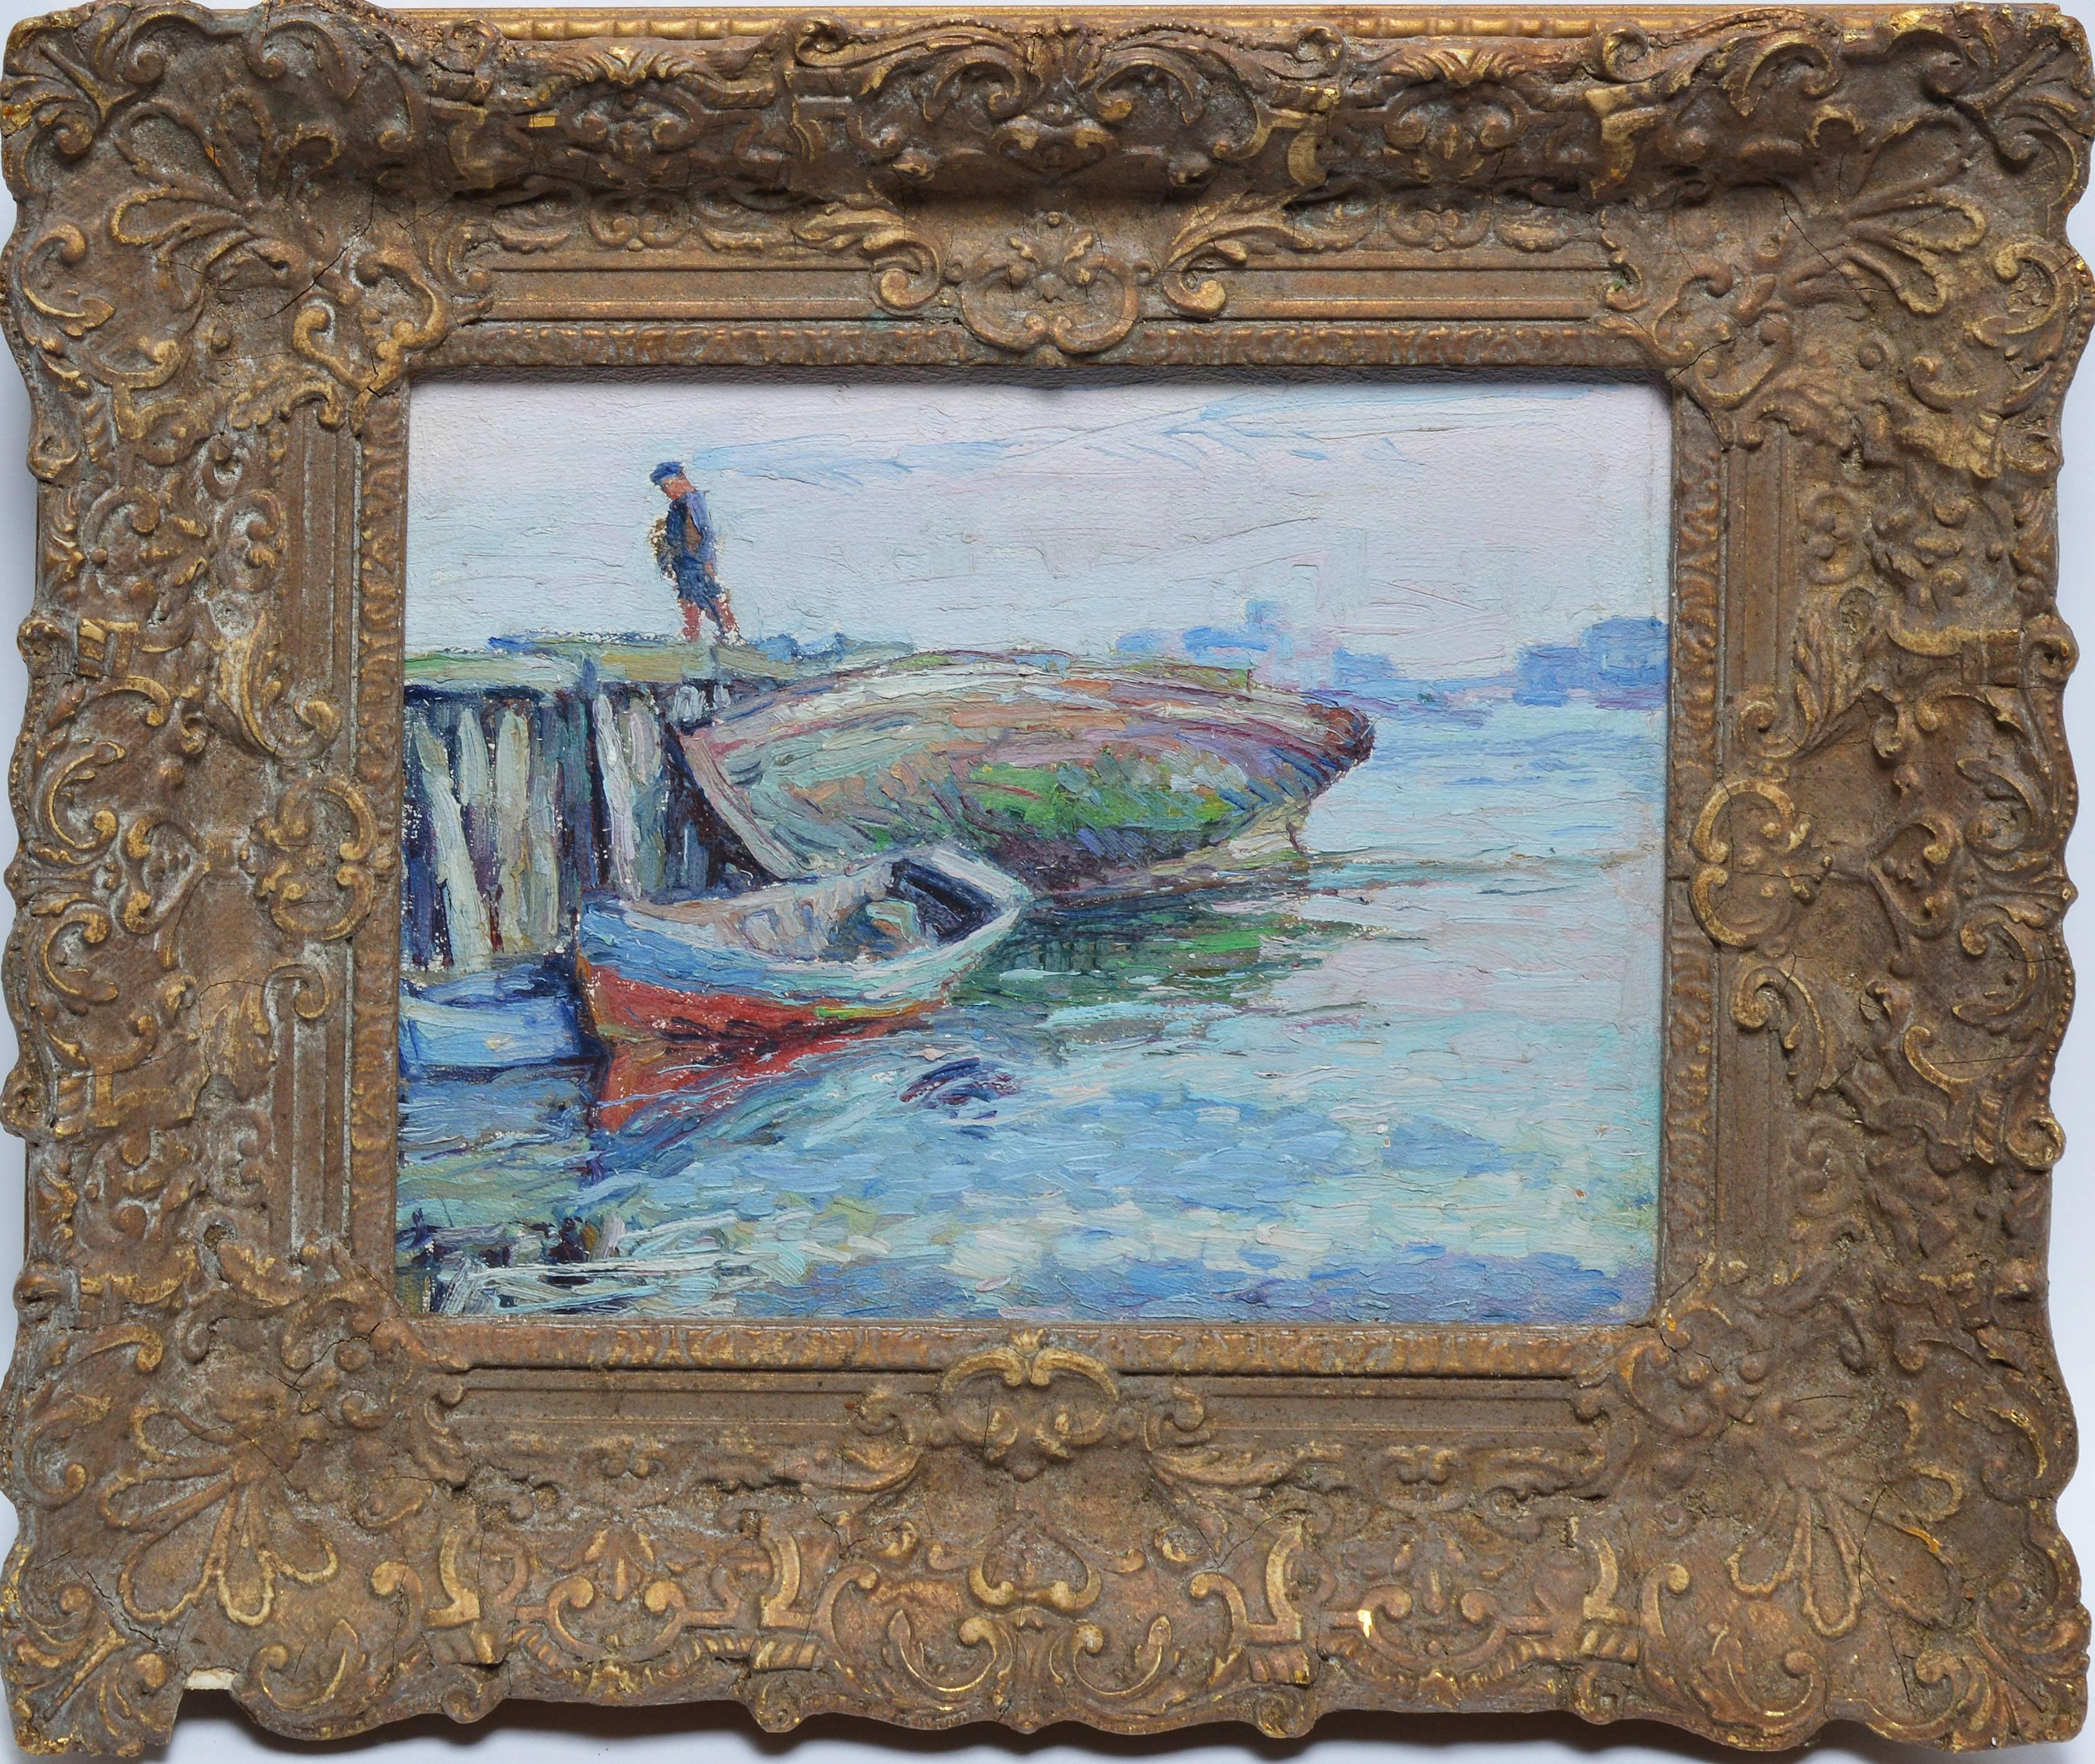 Impressionist seascape with a figure and fishing boats by George Renouard.  Oil on board, circa 1928.  Titled on verso, "Christmas Morning 1928".  Displayed in a giltwood frame.  Image size, 10"L x 8"H, overall 15"L x 13"H.